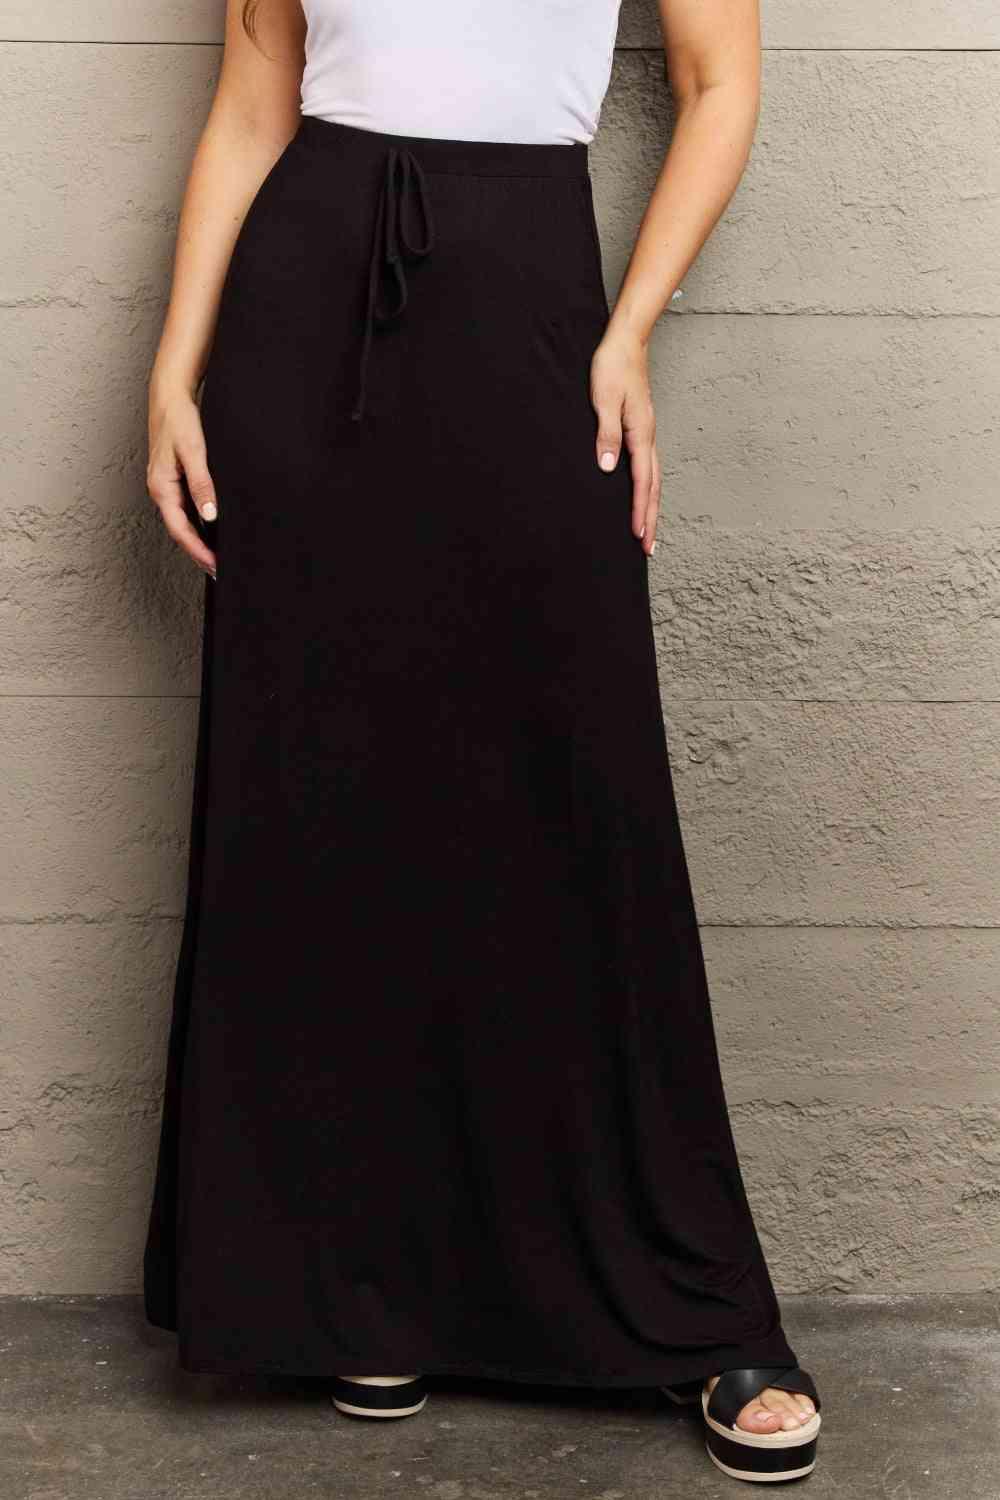 Culture Code For The Day Flare Maxi Skirt in Black - God's Girl Gifts And Apparel